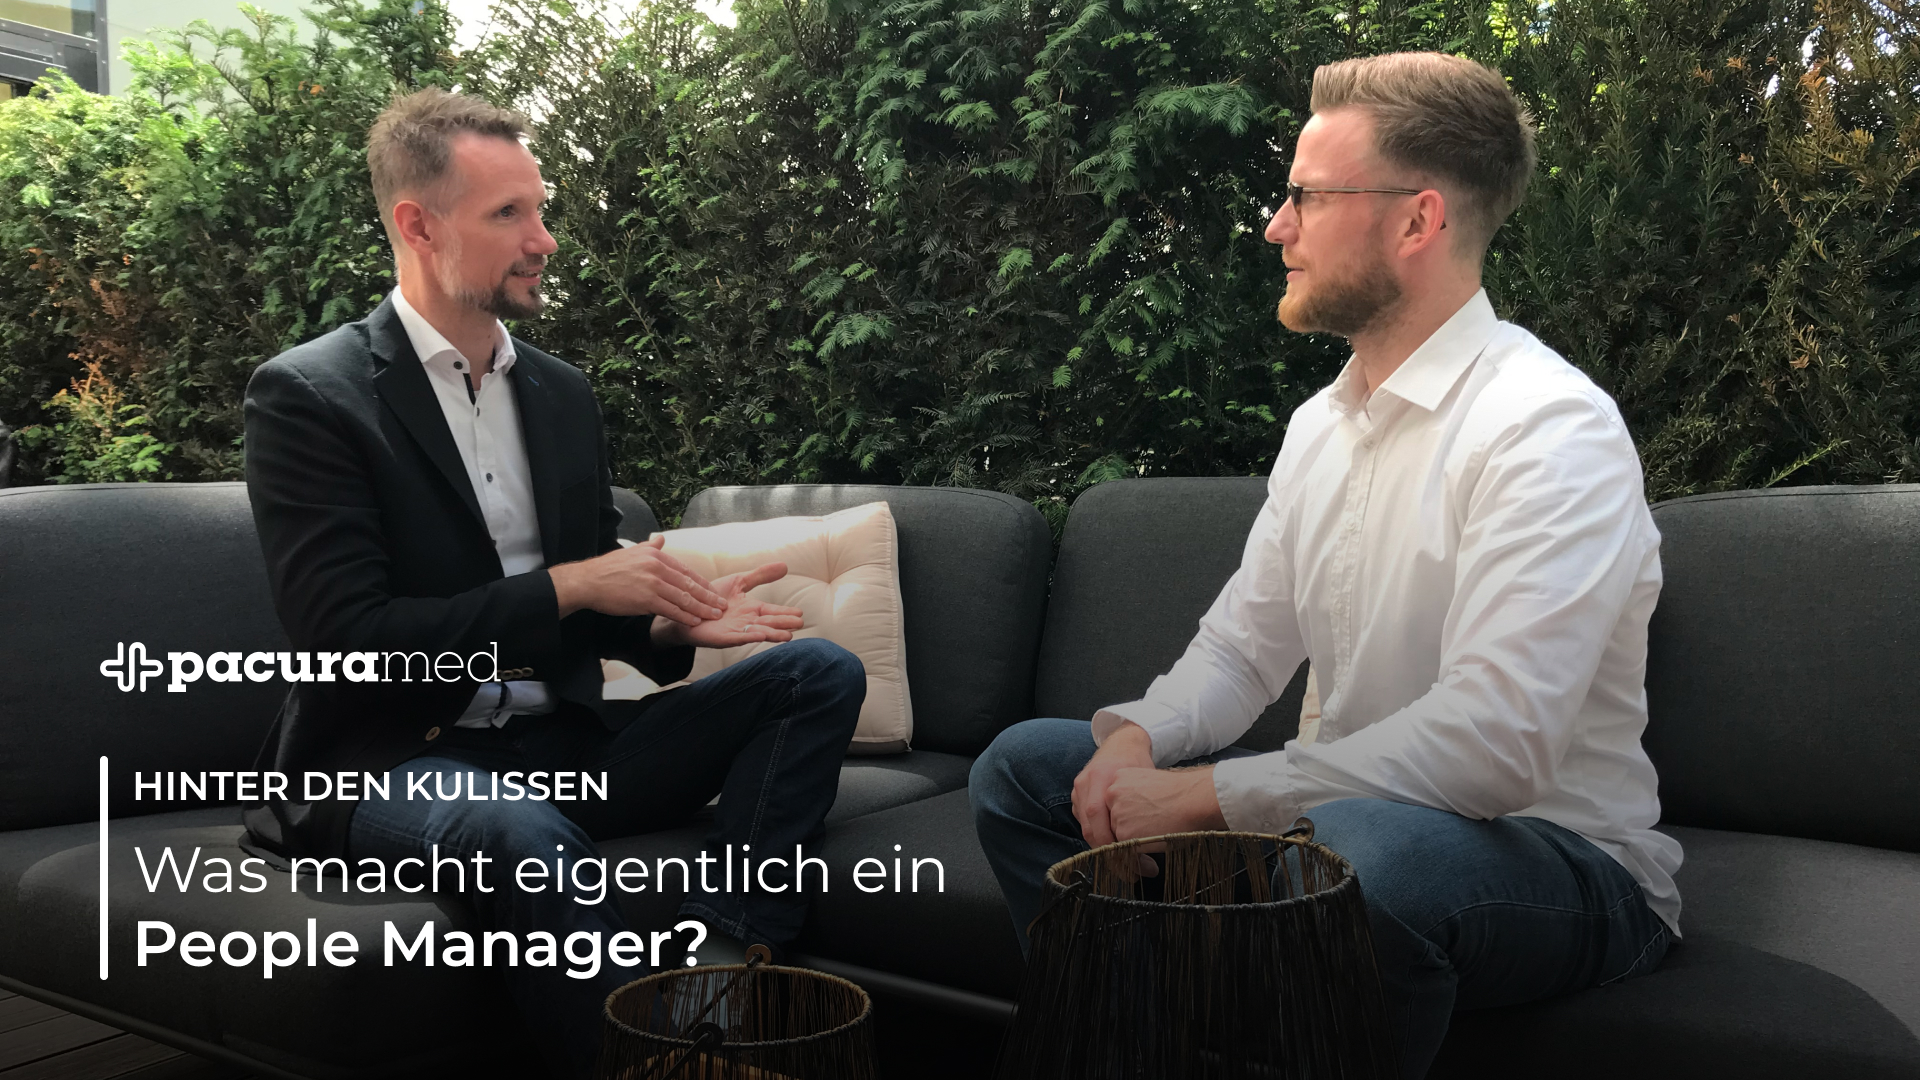 Interview mit unserem Pacura med People Manager